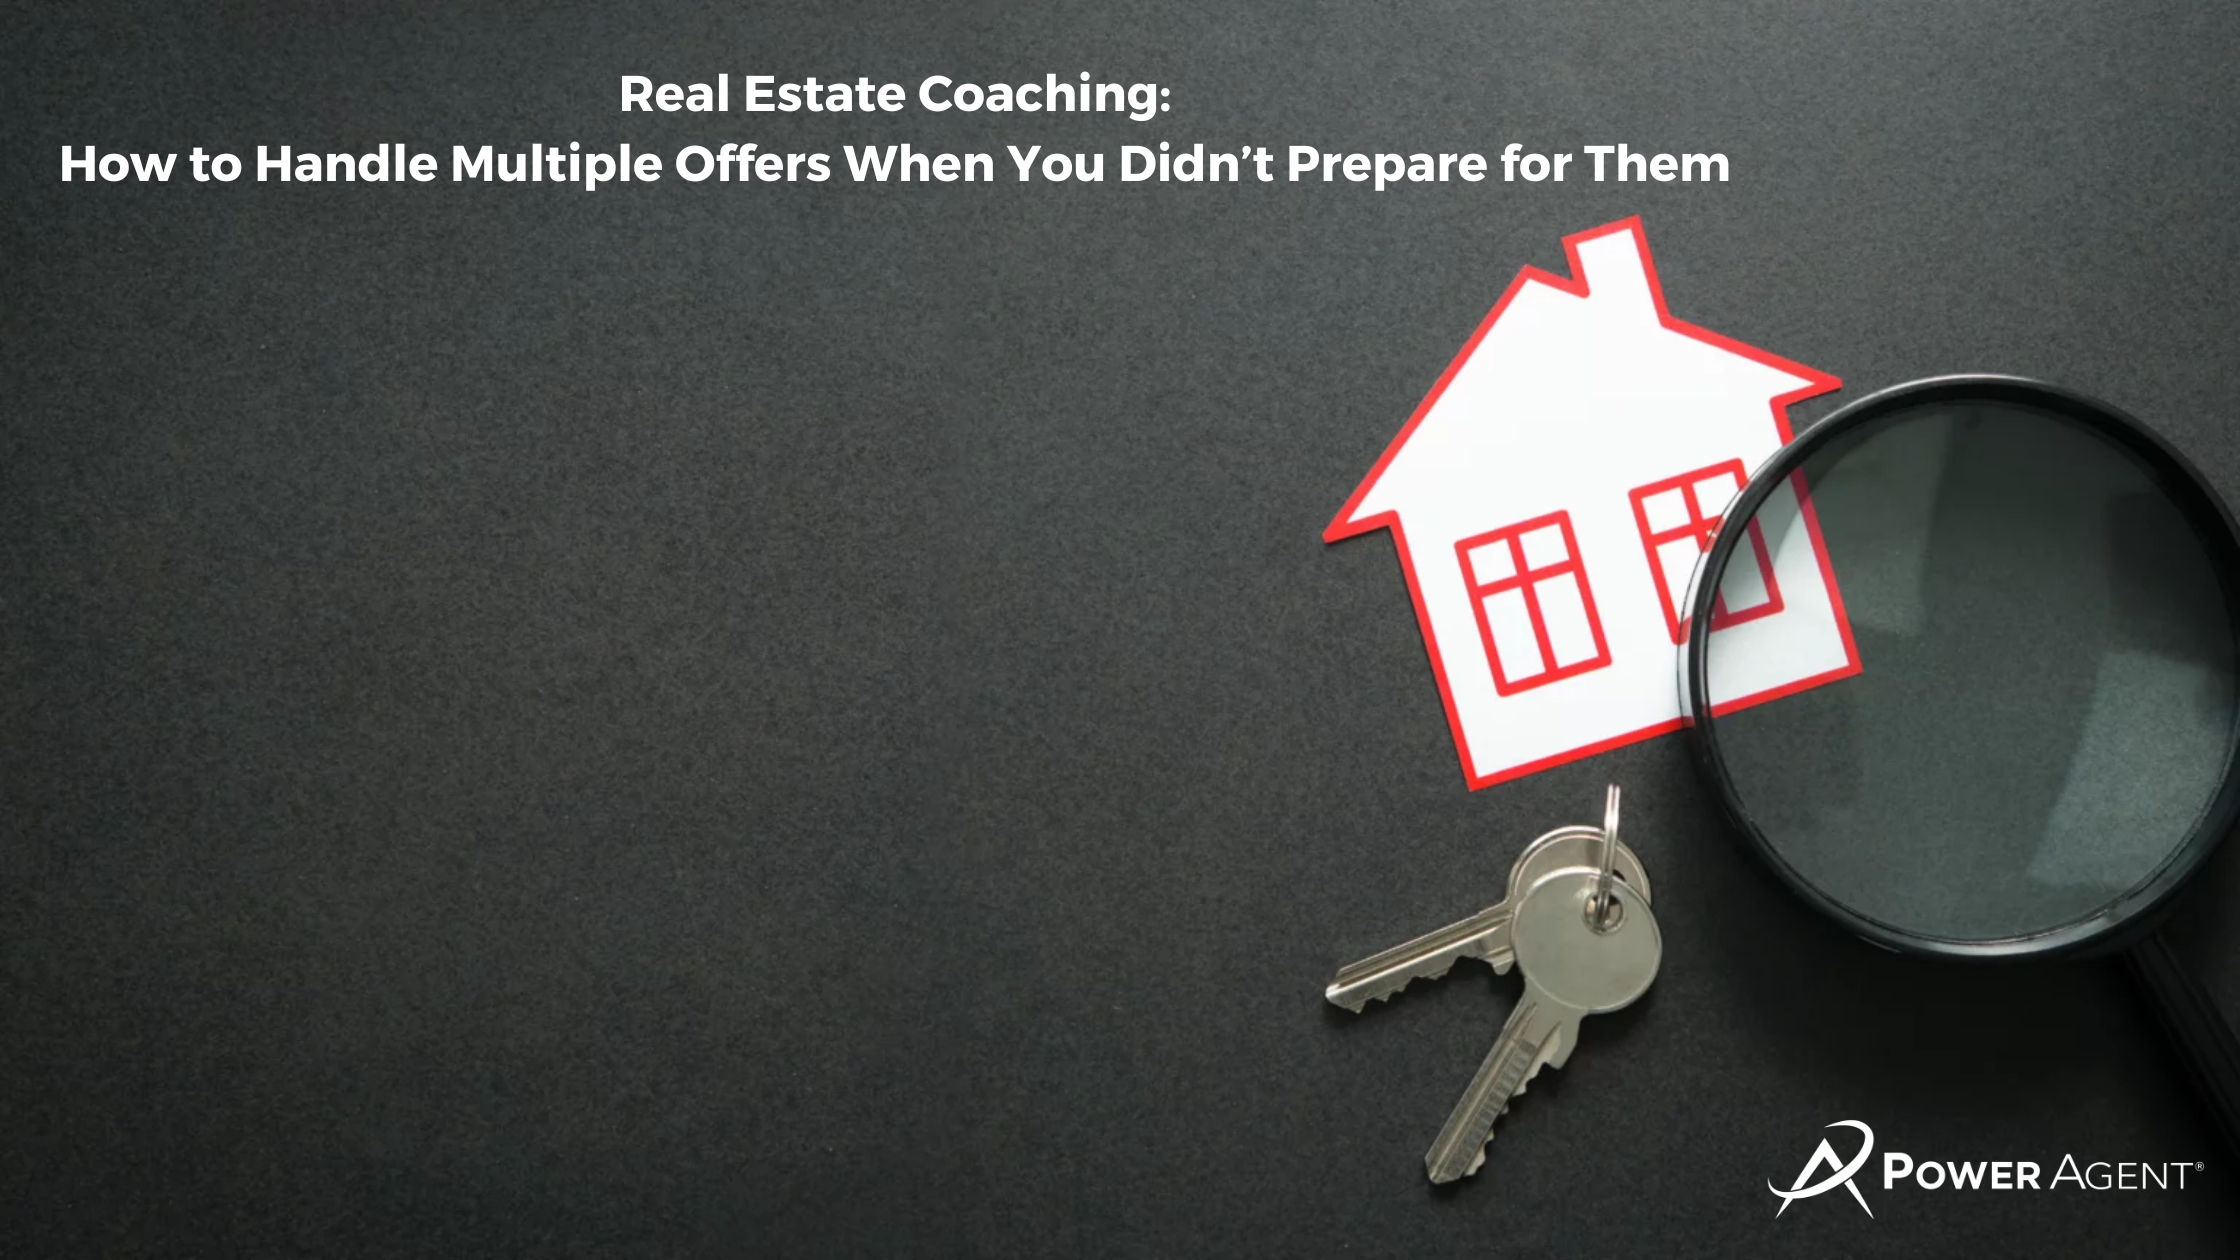 Real Estate Coaching: How to Handle Multiple Offers When You Didn’t Prepare for Them